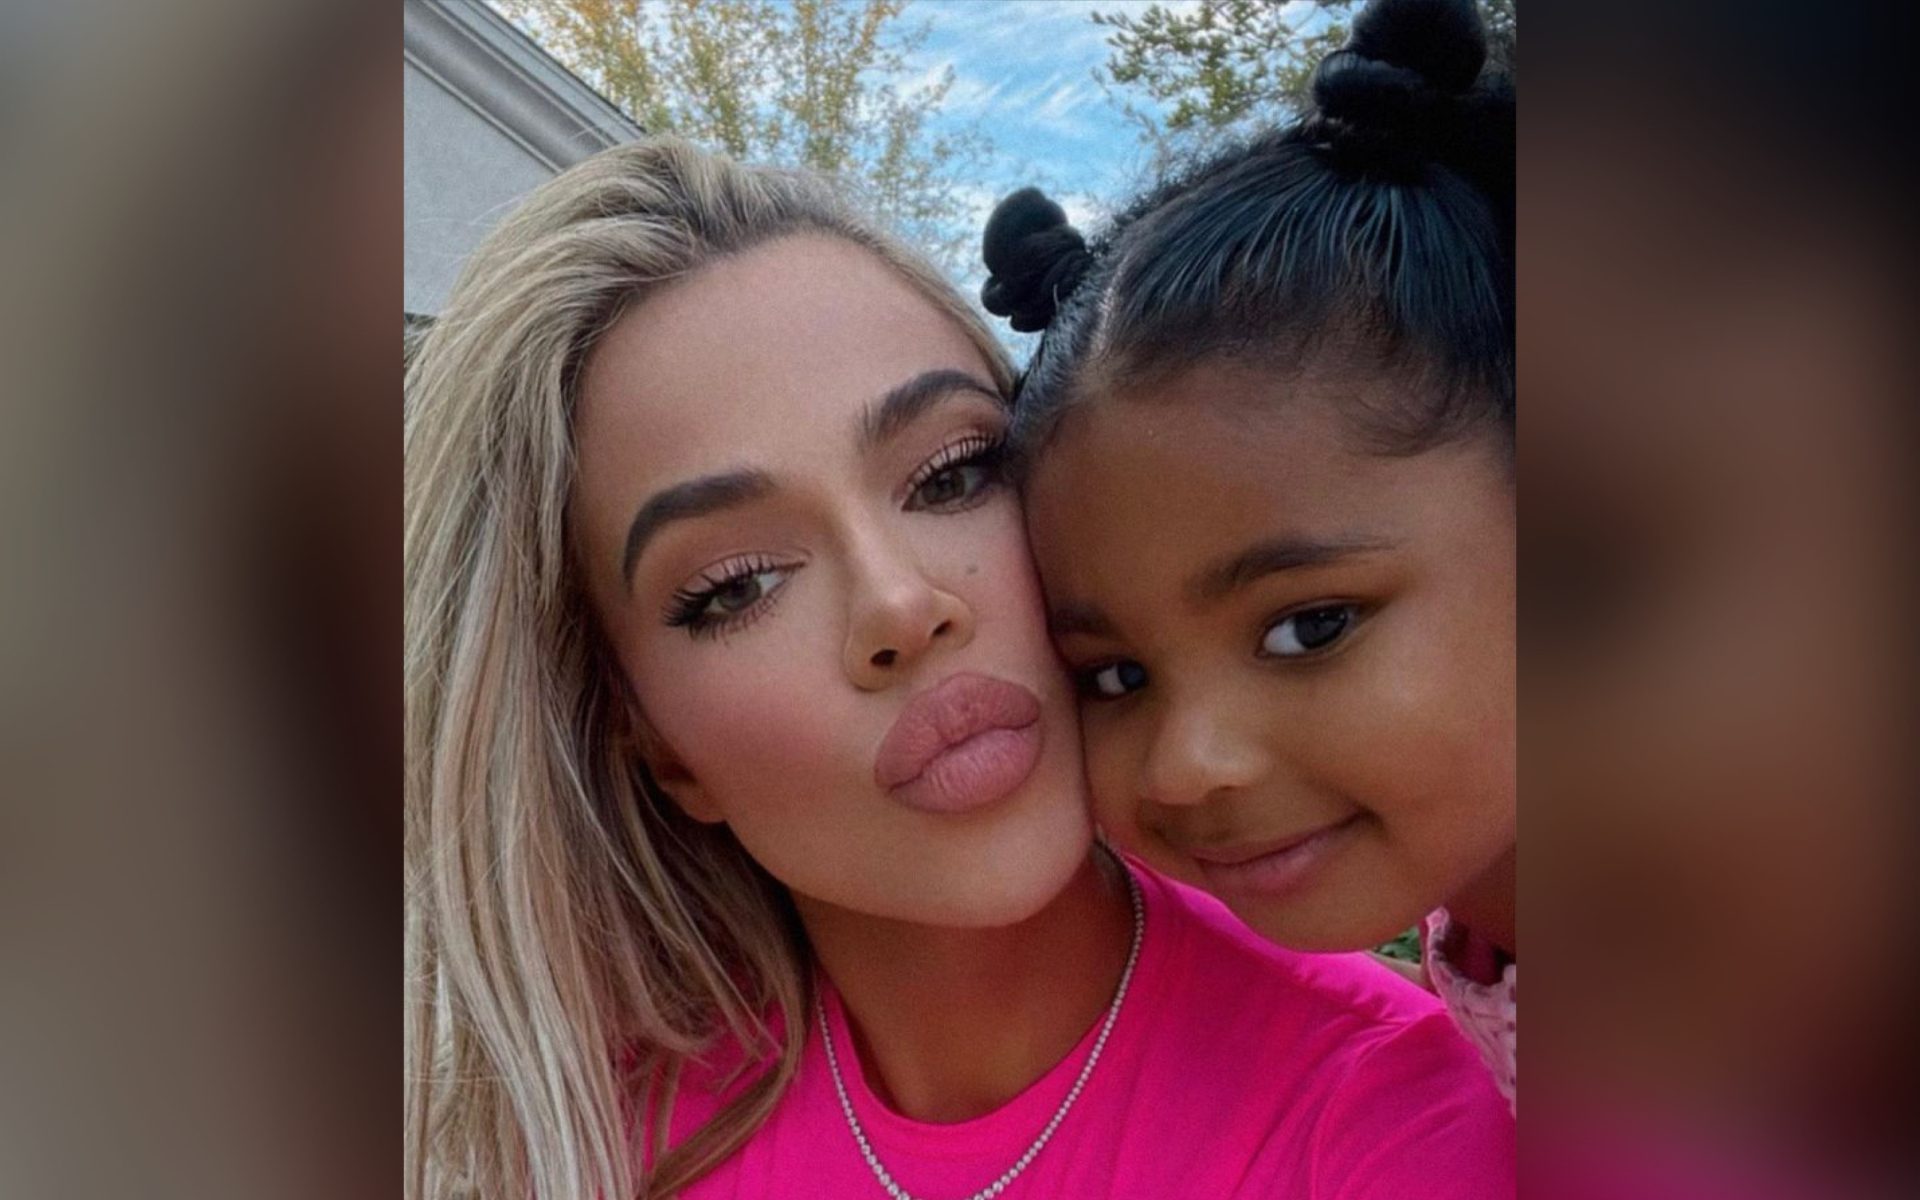 Khloé Kardashian Claps Back At Criticism About Holding Daughter True "Too Much"